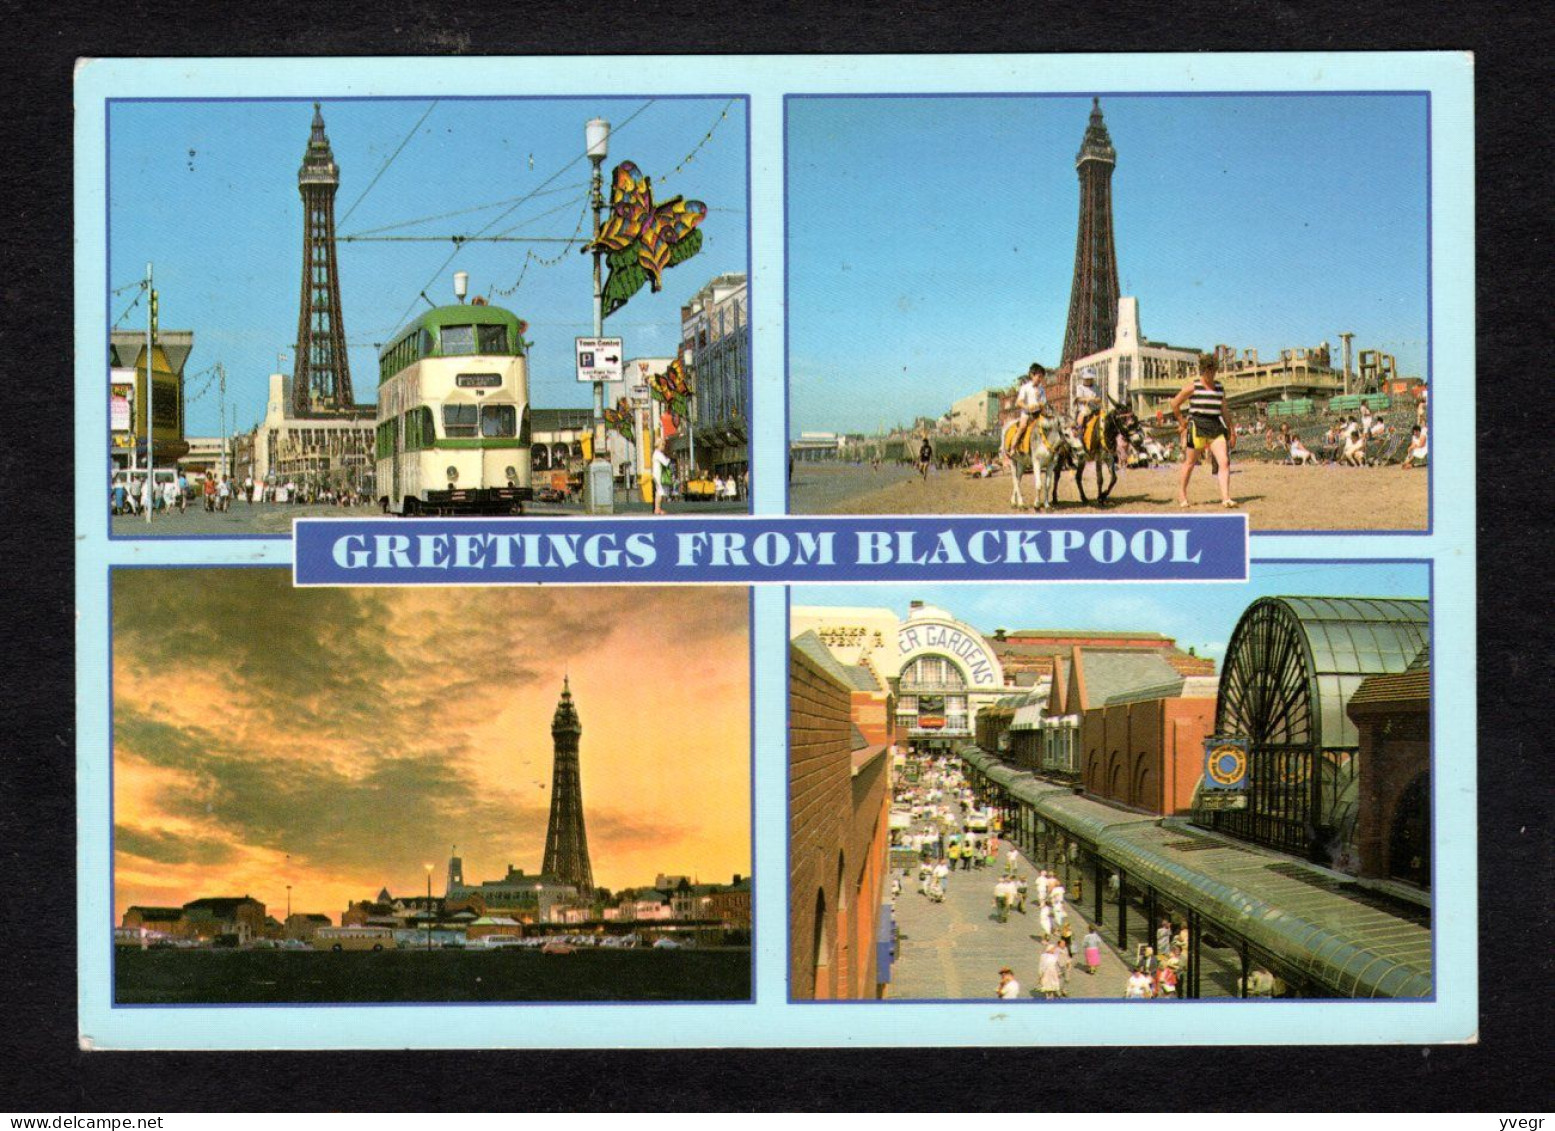 Angleterre - Greetings From BLACKPOOL - Vues Diverses - Multi View - Tramway - Blackpool